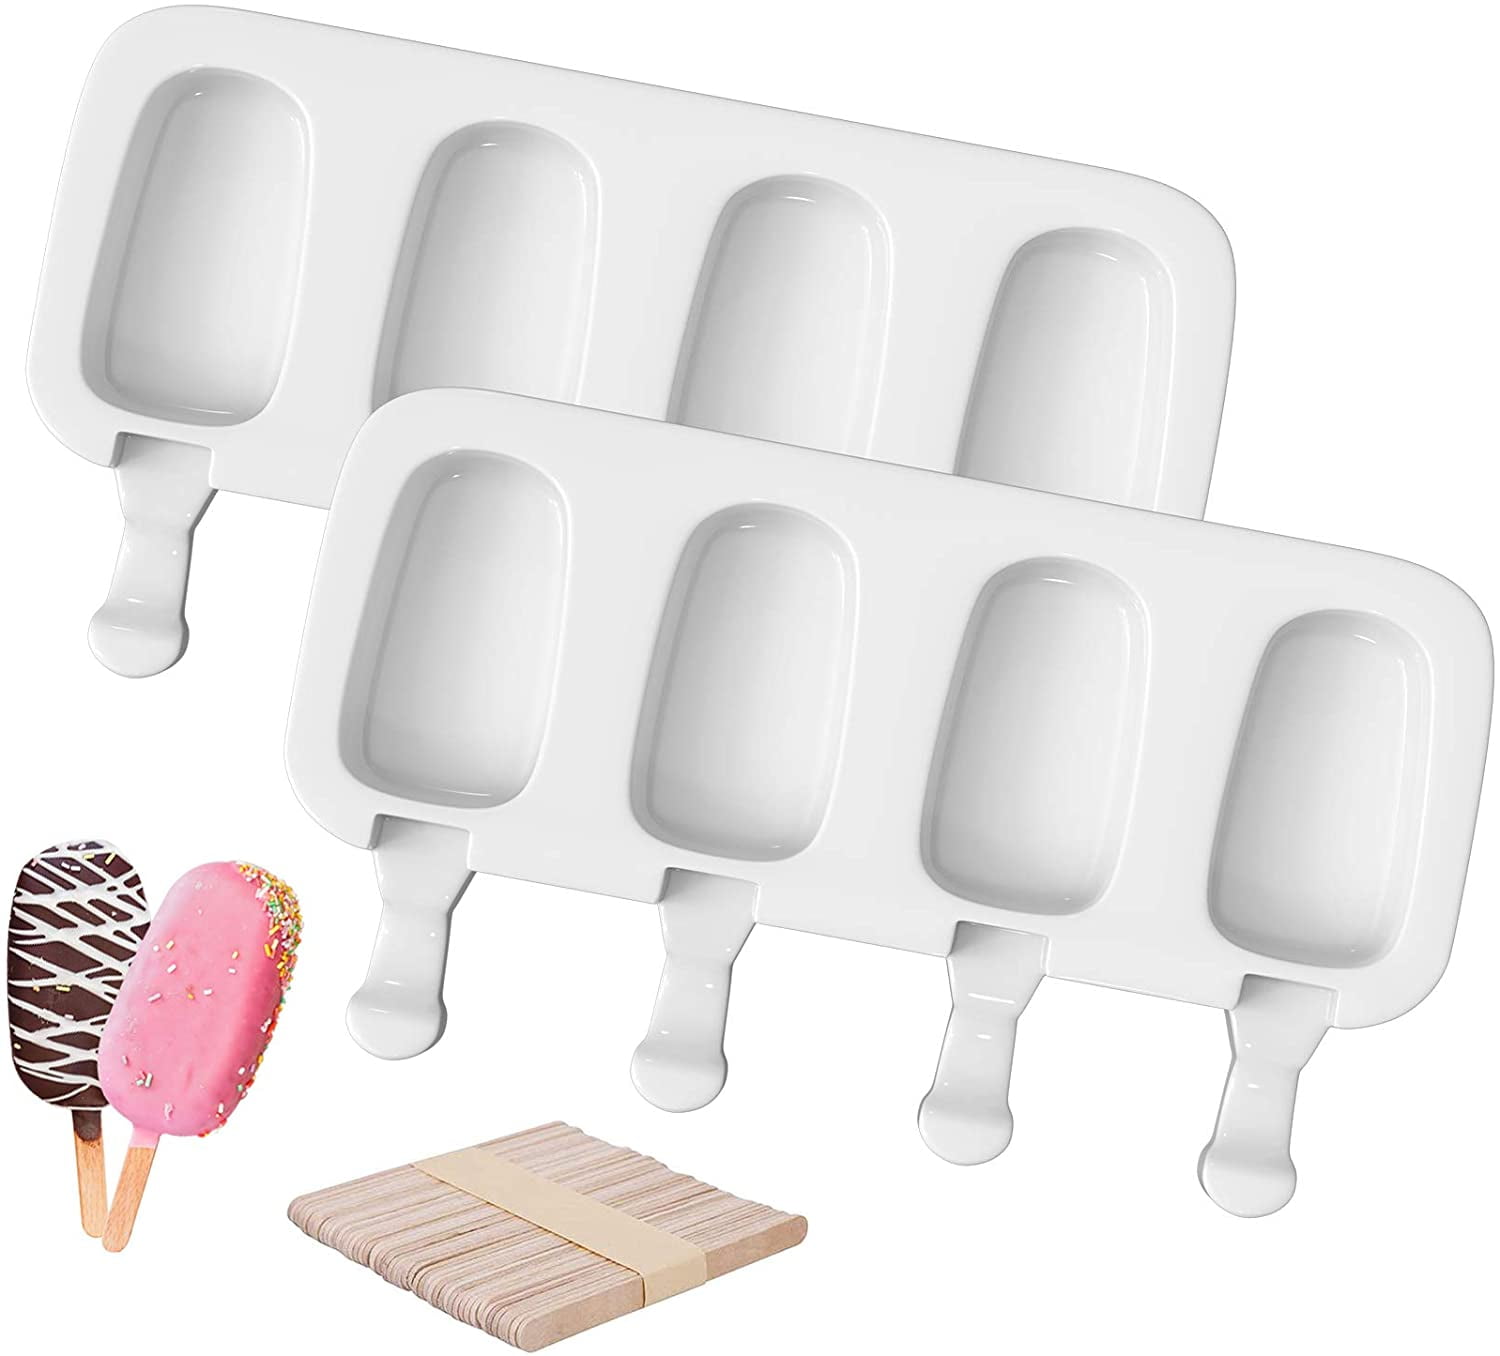 Forzero Popsicle Molds, 2-Cavities Homemade Silicone Ice Pop Mold with Lid, Cute Cartoon Shape Ice Cream Mould for Kids, Popsicles Maker(Set of 2), Multicolor